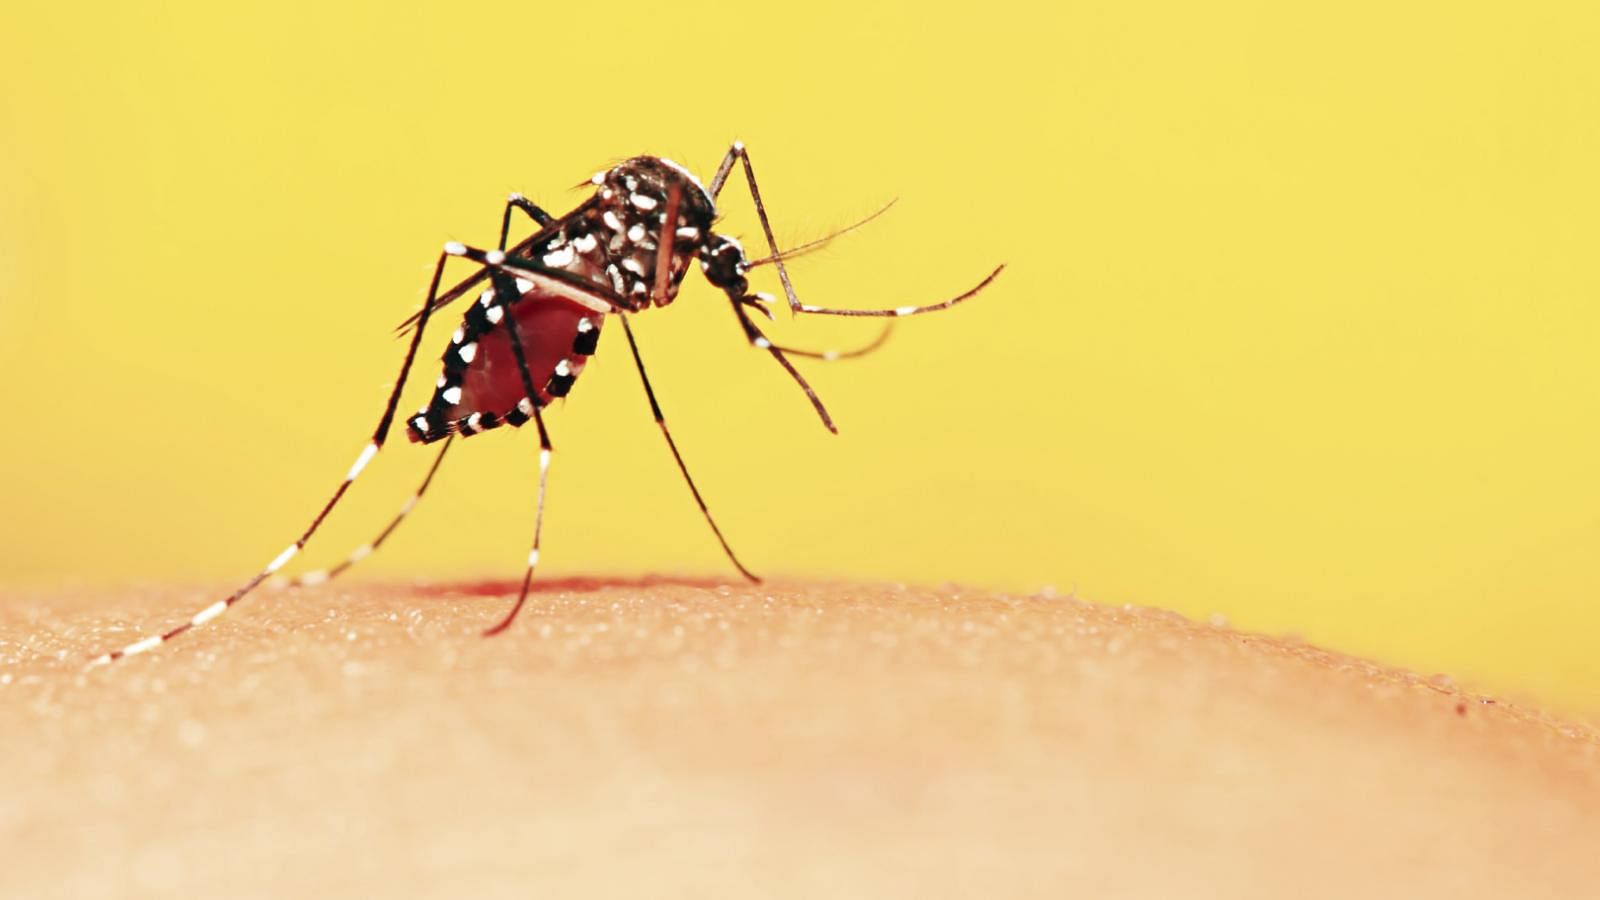 A slight rise in temperature may increase the risk of malaria to hundreds of thousands, in areas that are currently too cold.